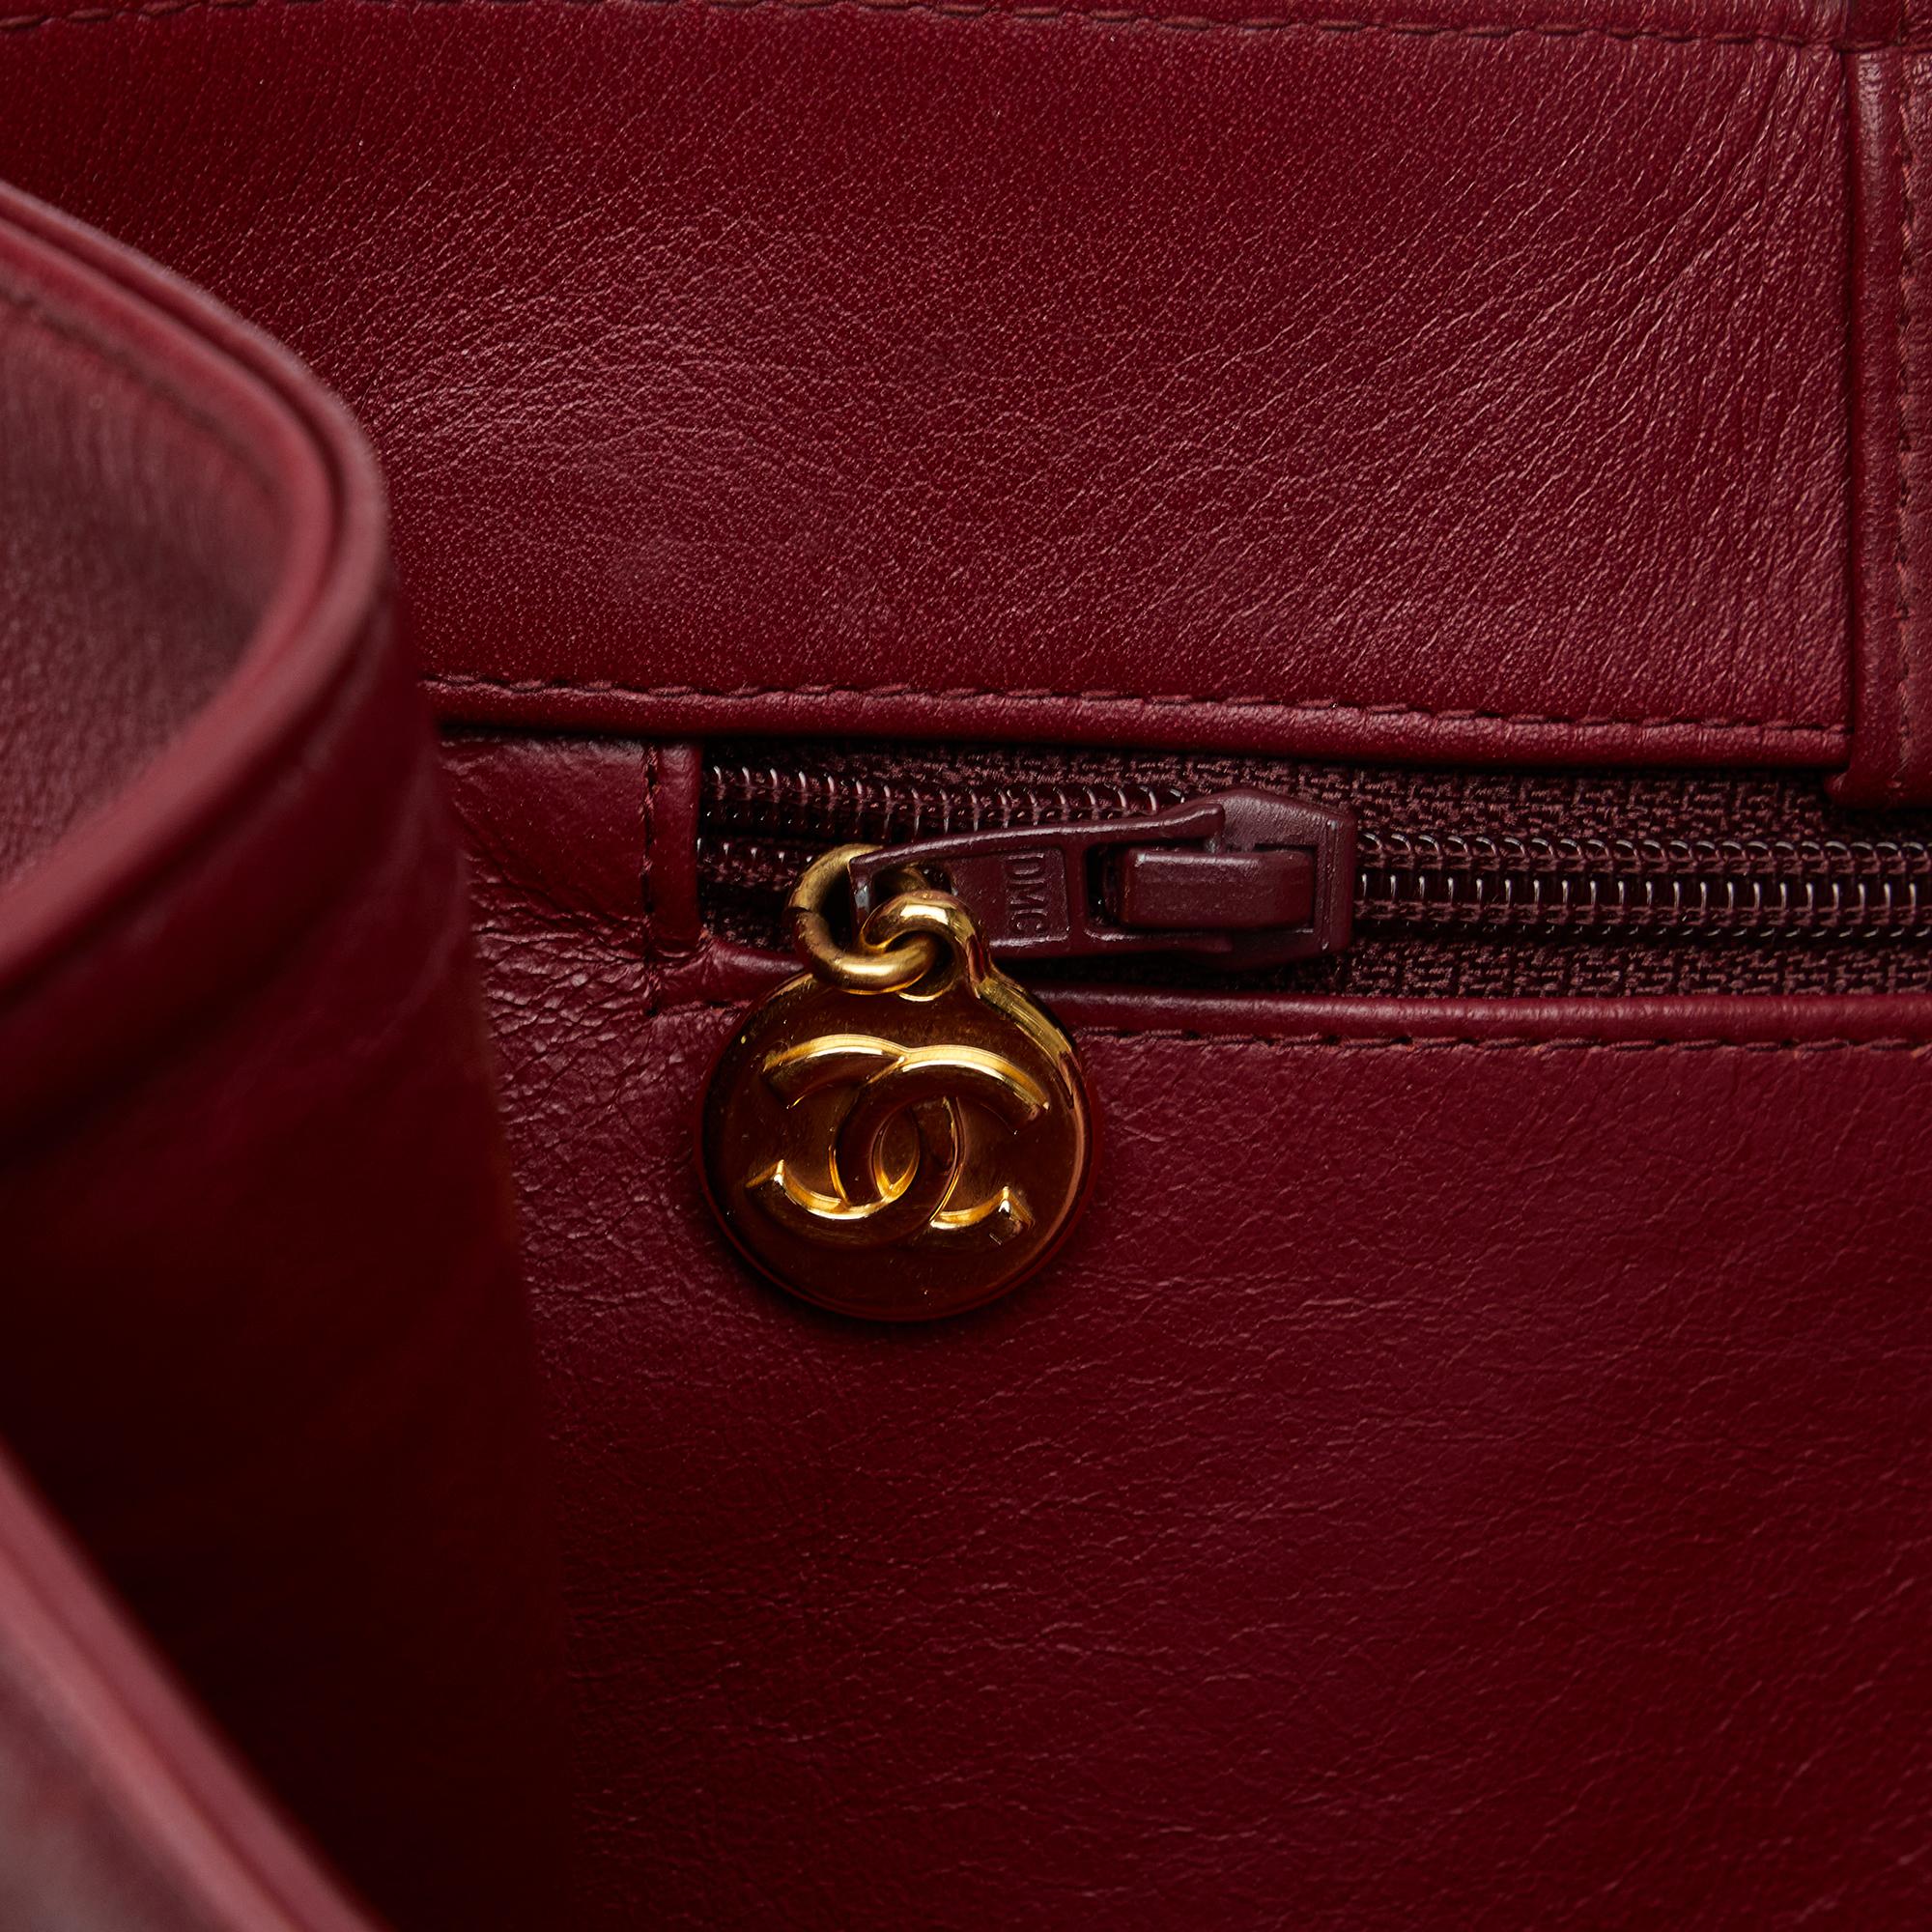 Chanel Red CC Lambskin Tote Bag